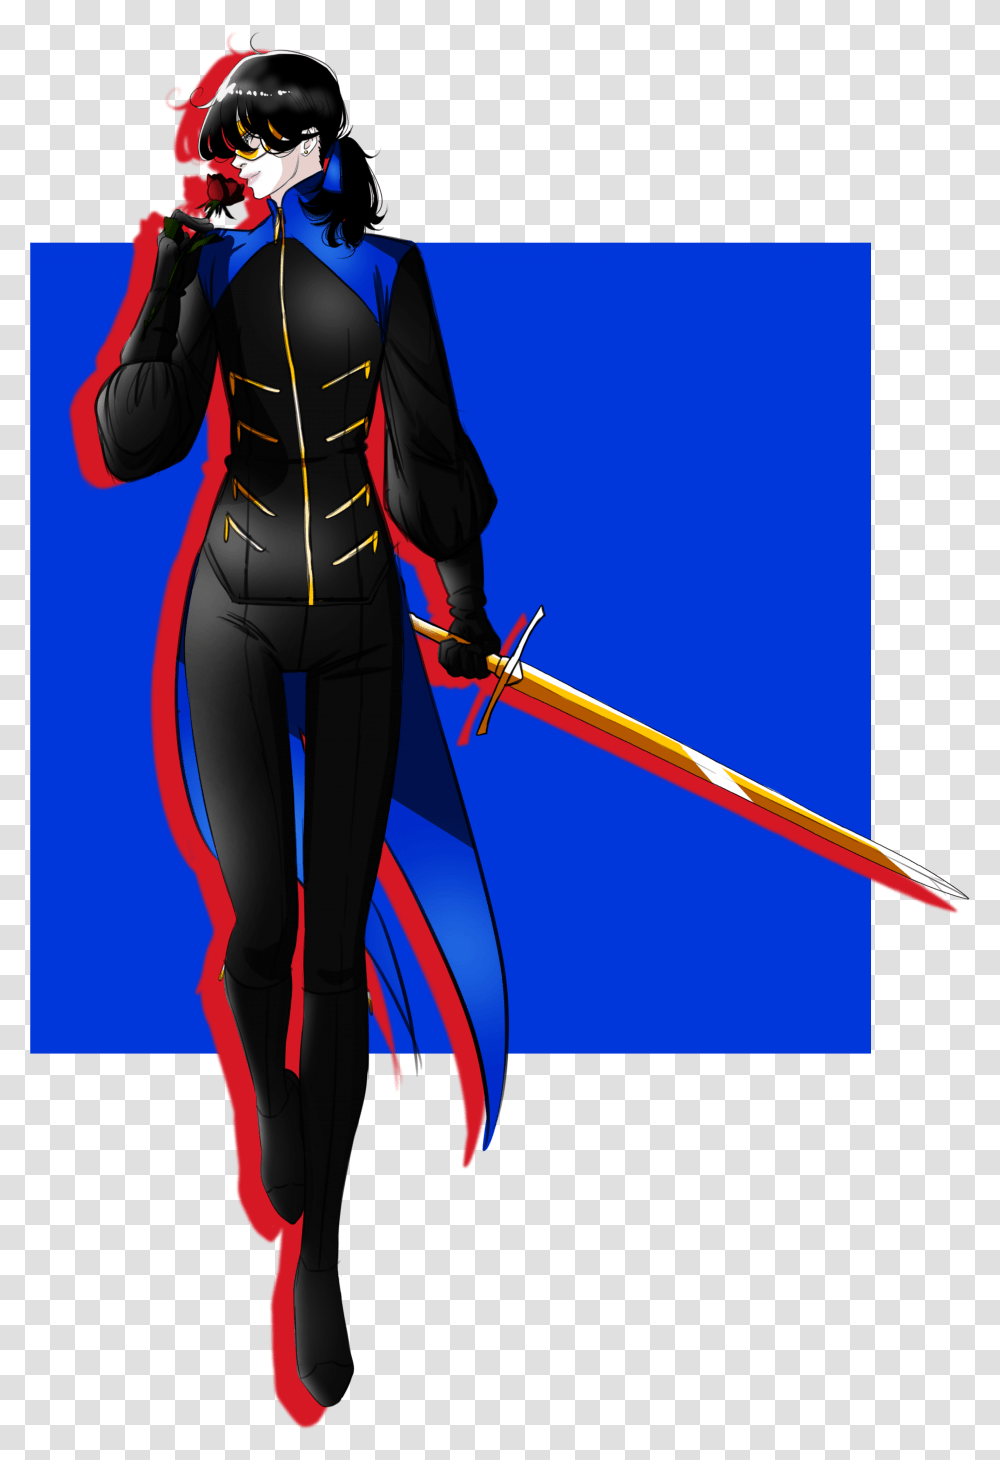 Persona 5 Oc Kase Akimoto - Weasyl Persona 3 Metaverse Outfits, Helmet, Clothing, Weapon, Blade Transparent Png